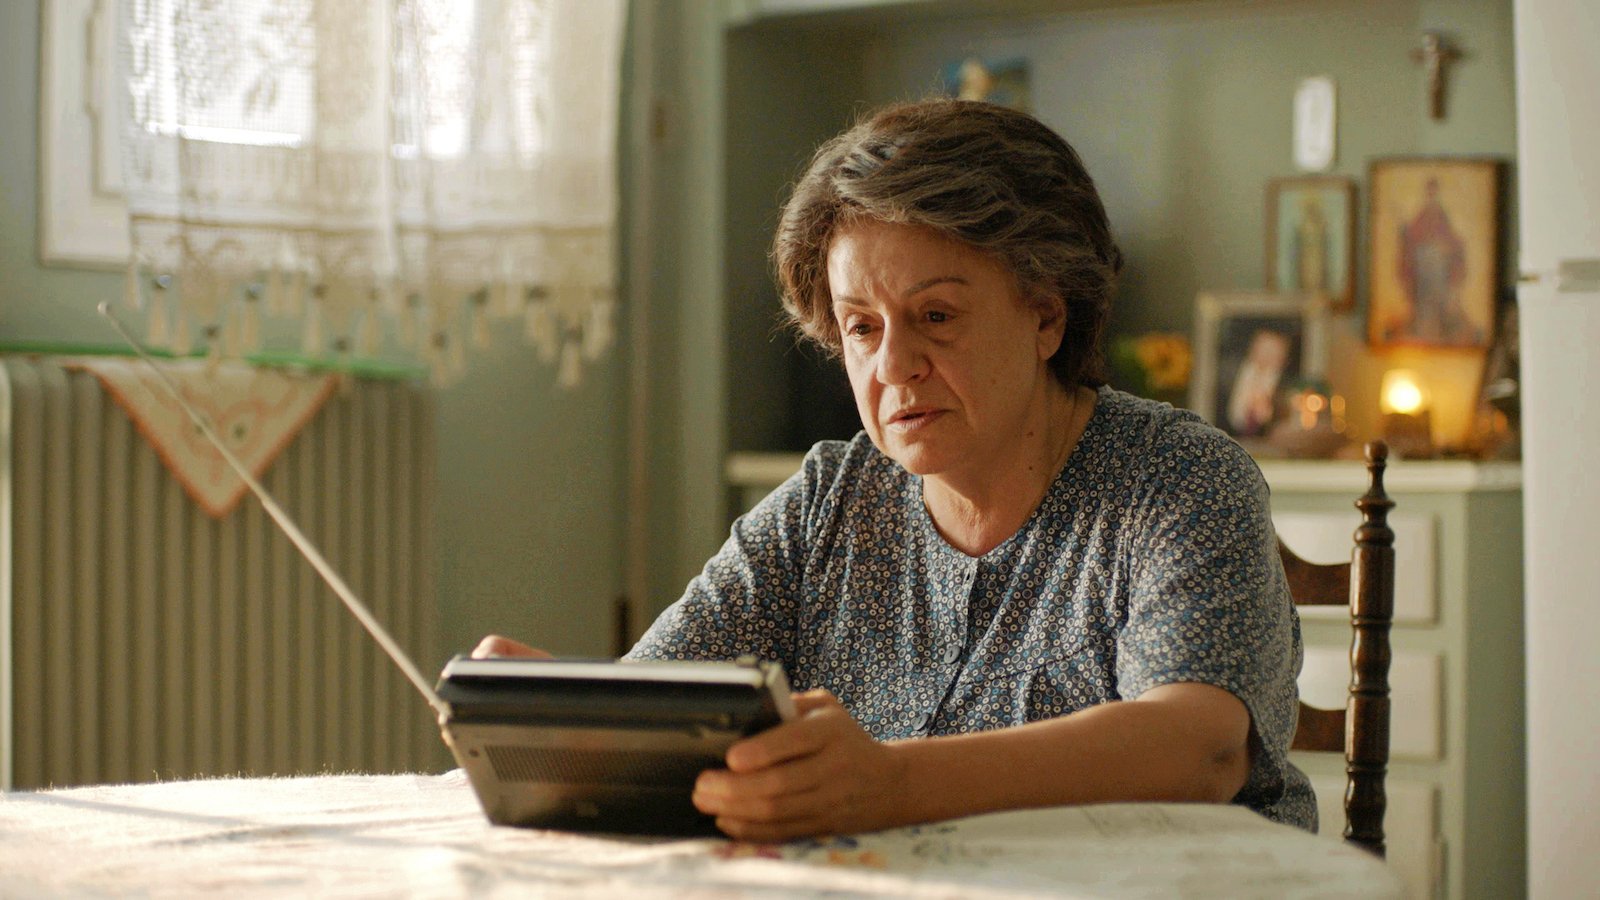 An older woman sits at a kitchen holding a transistor radio